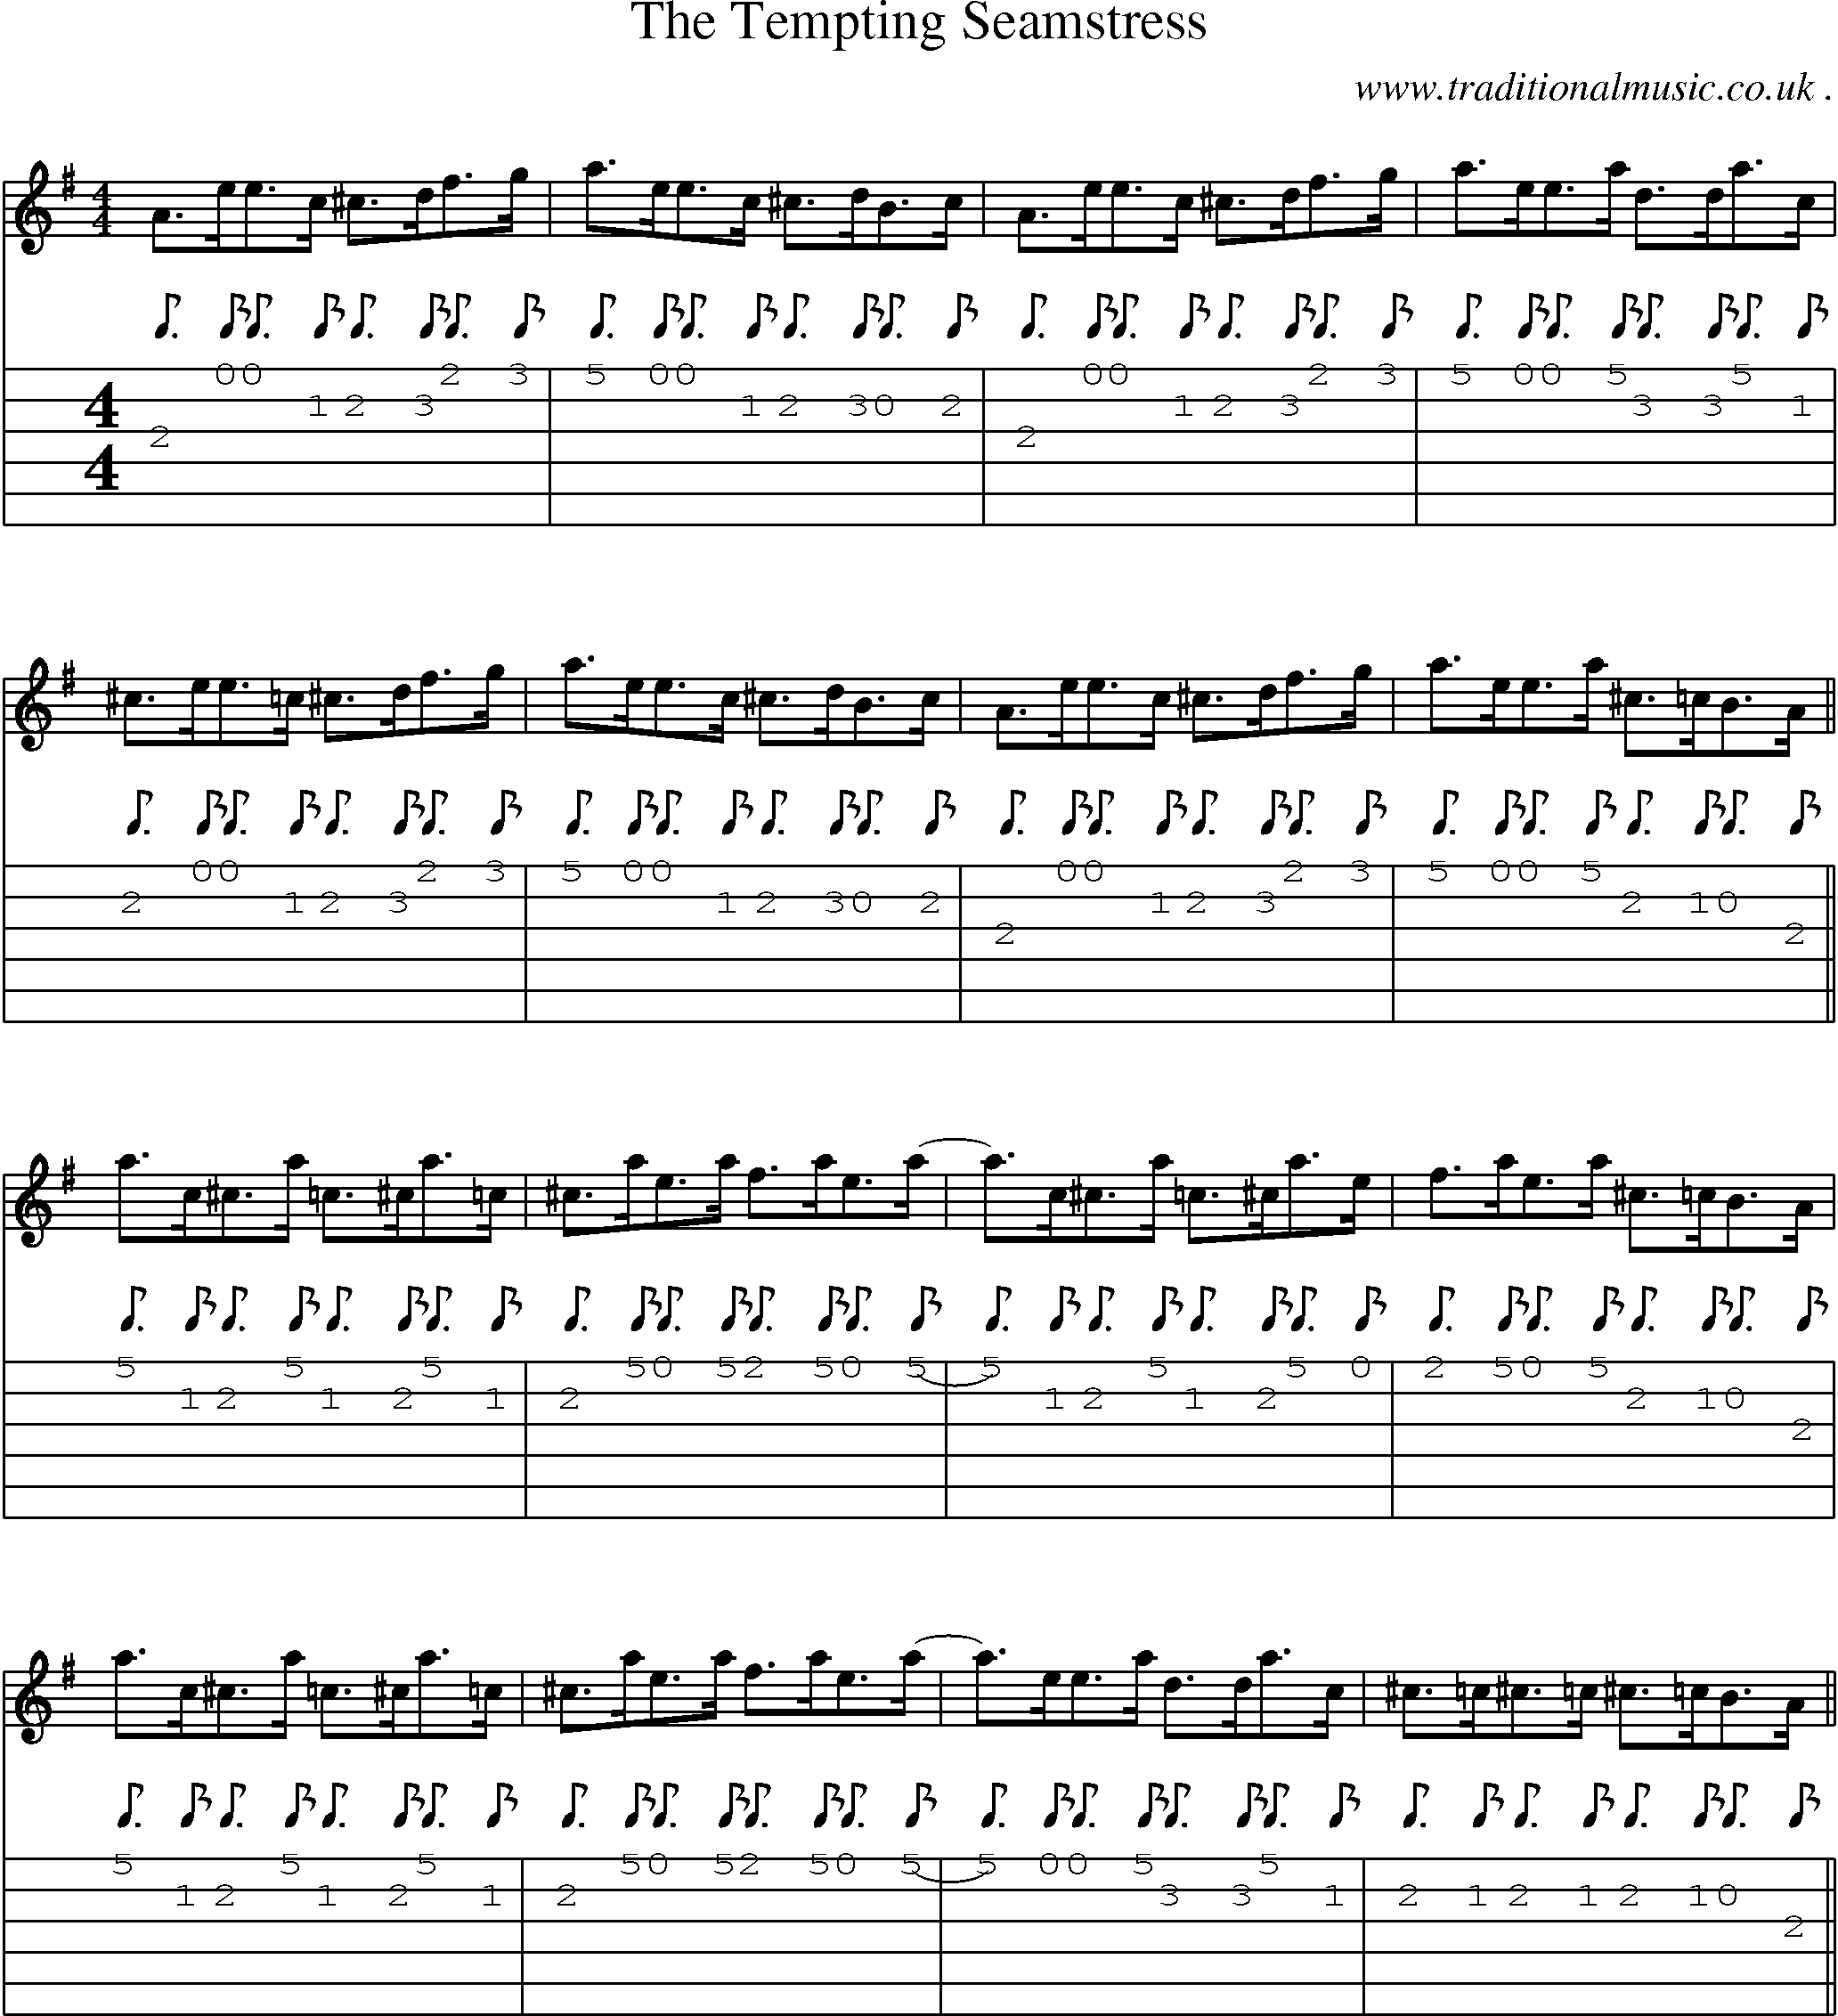 Sheet-Music and Guitar Tabs for The Tempting Seamstress